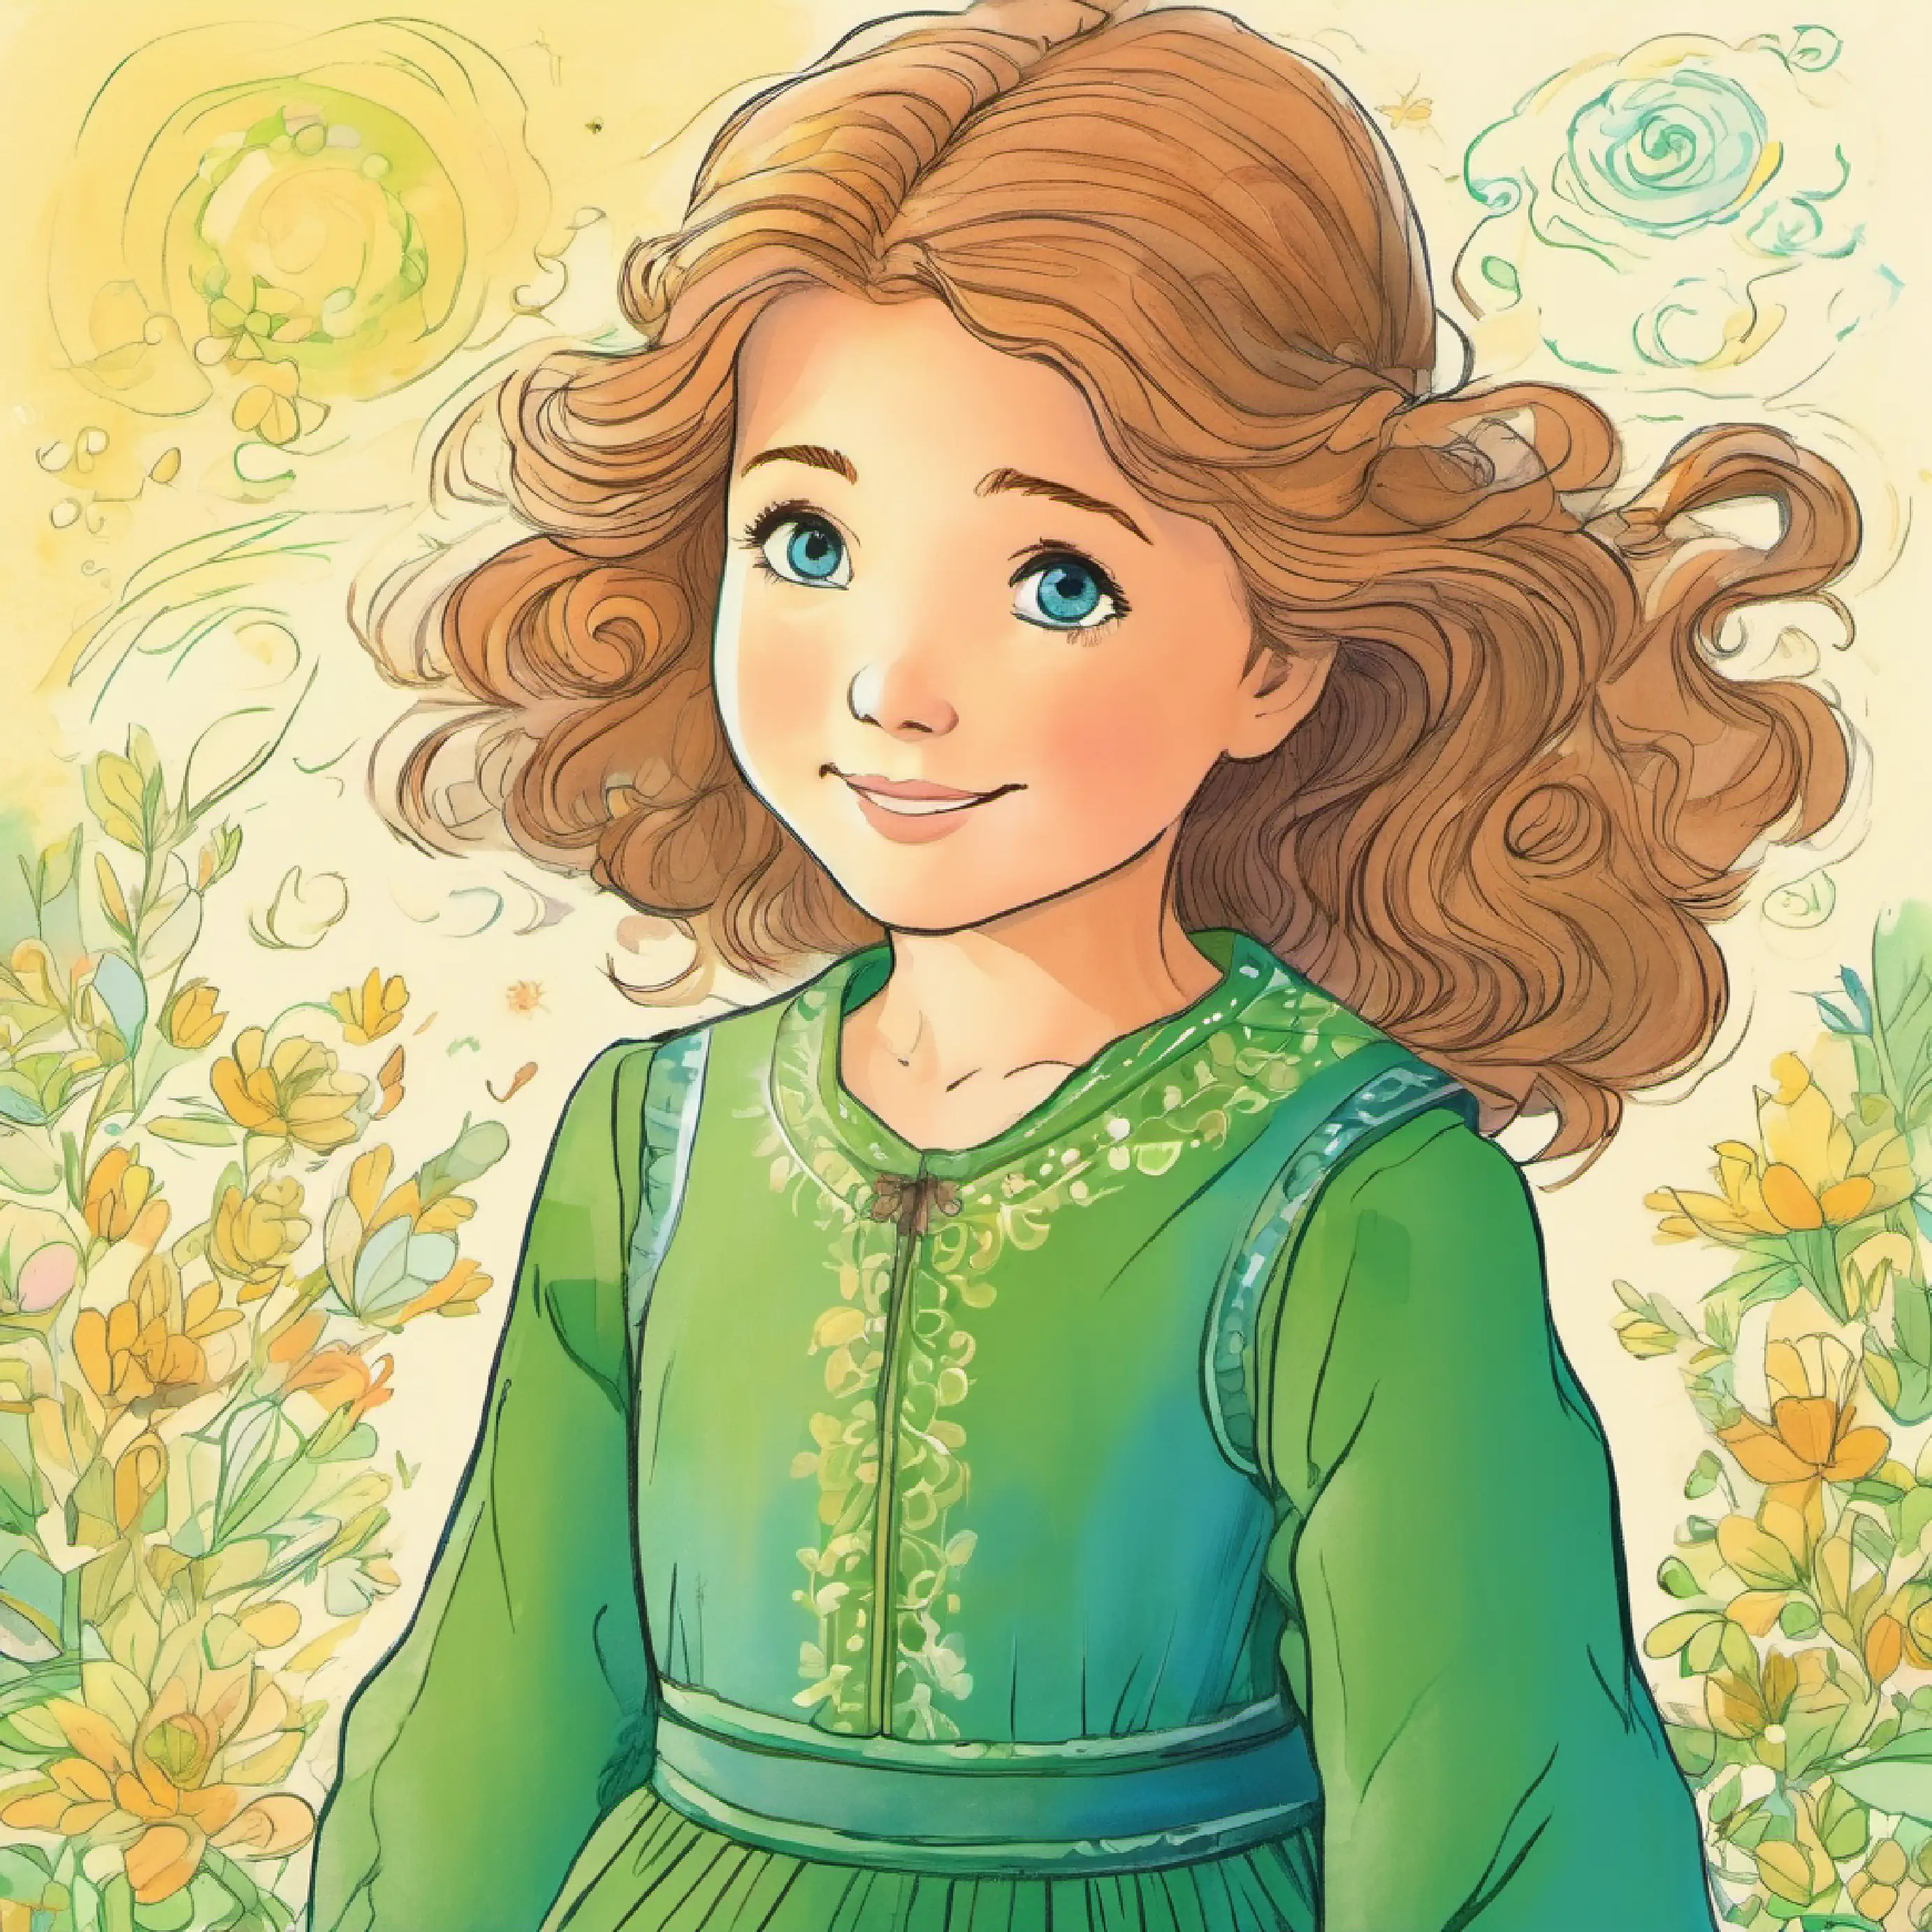 Girl with sunny hair, full of hope, bright blue eyes, wears a green dress recalling her mother's encouraging words.